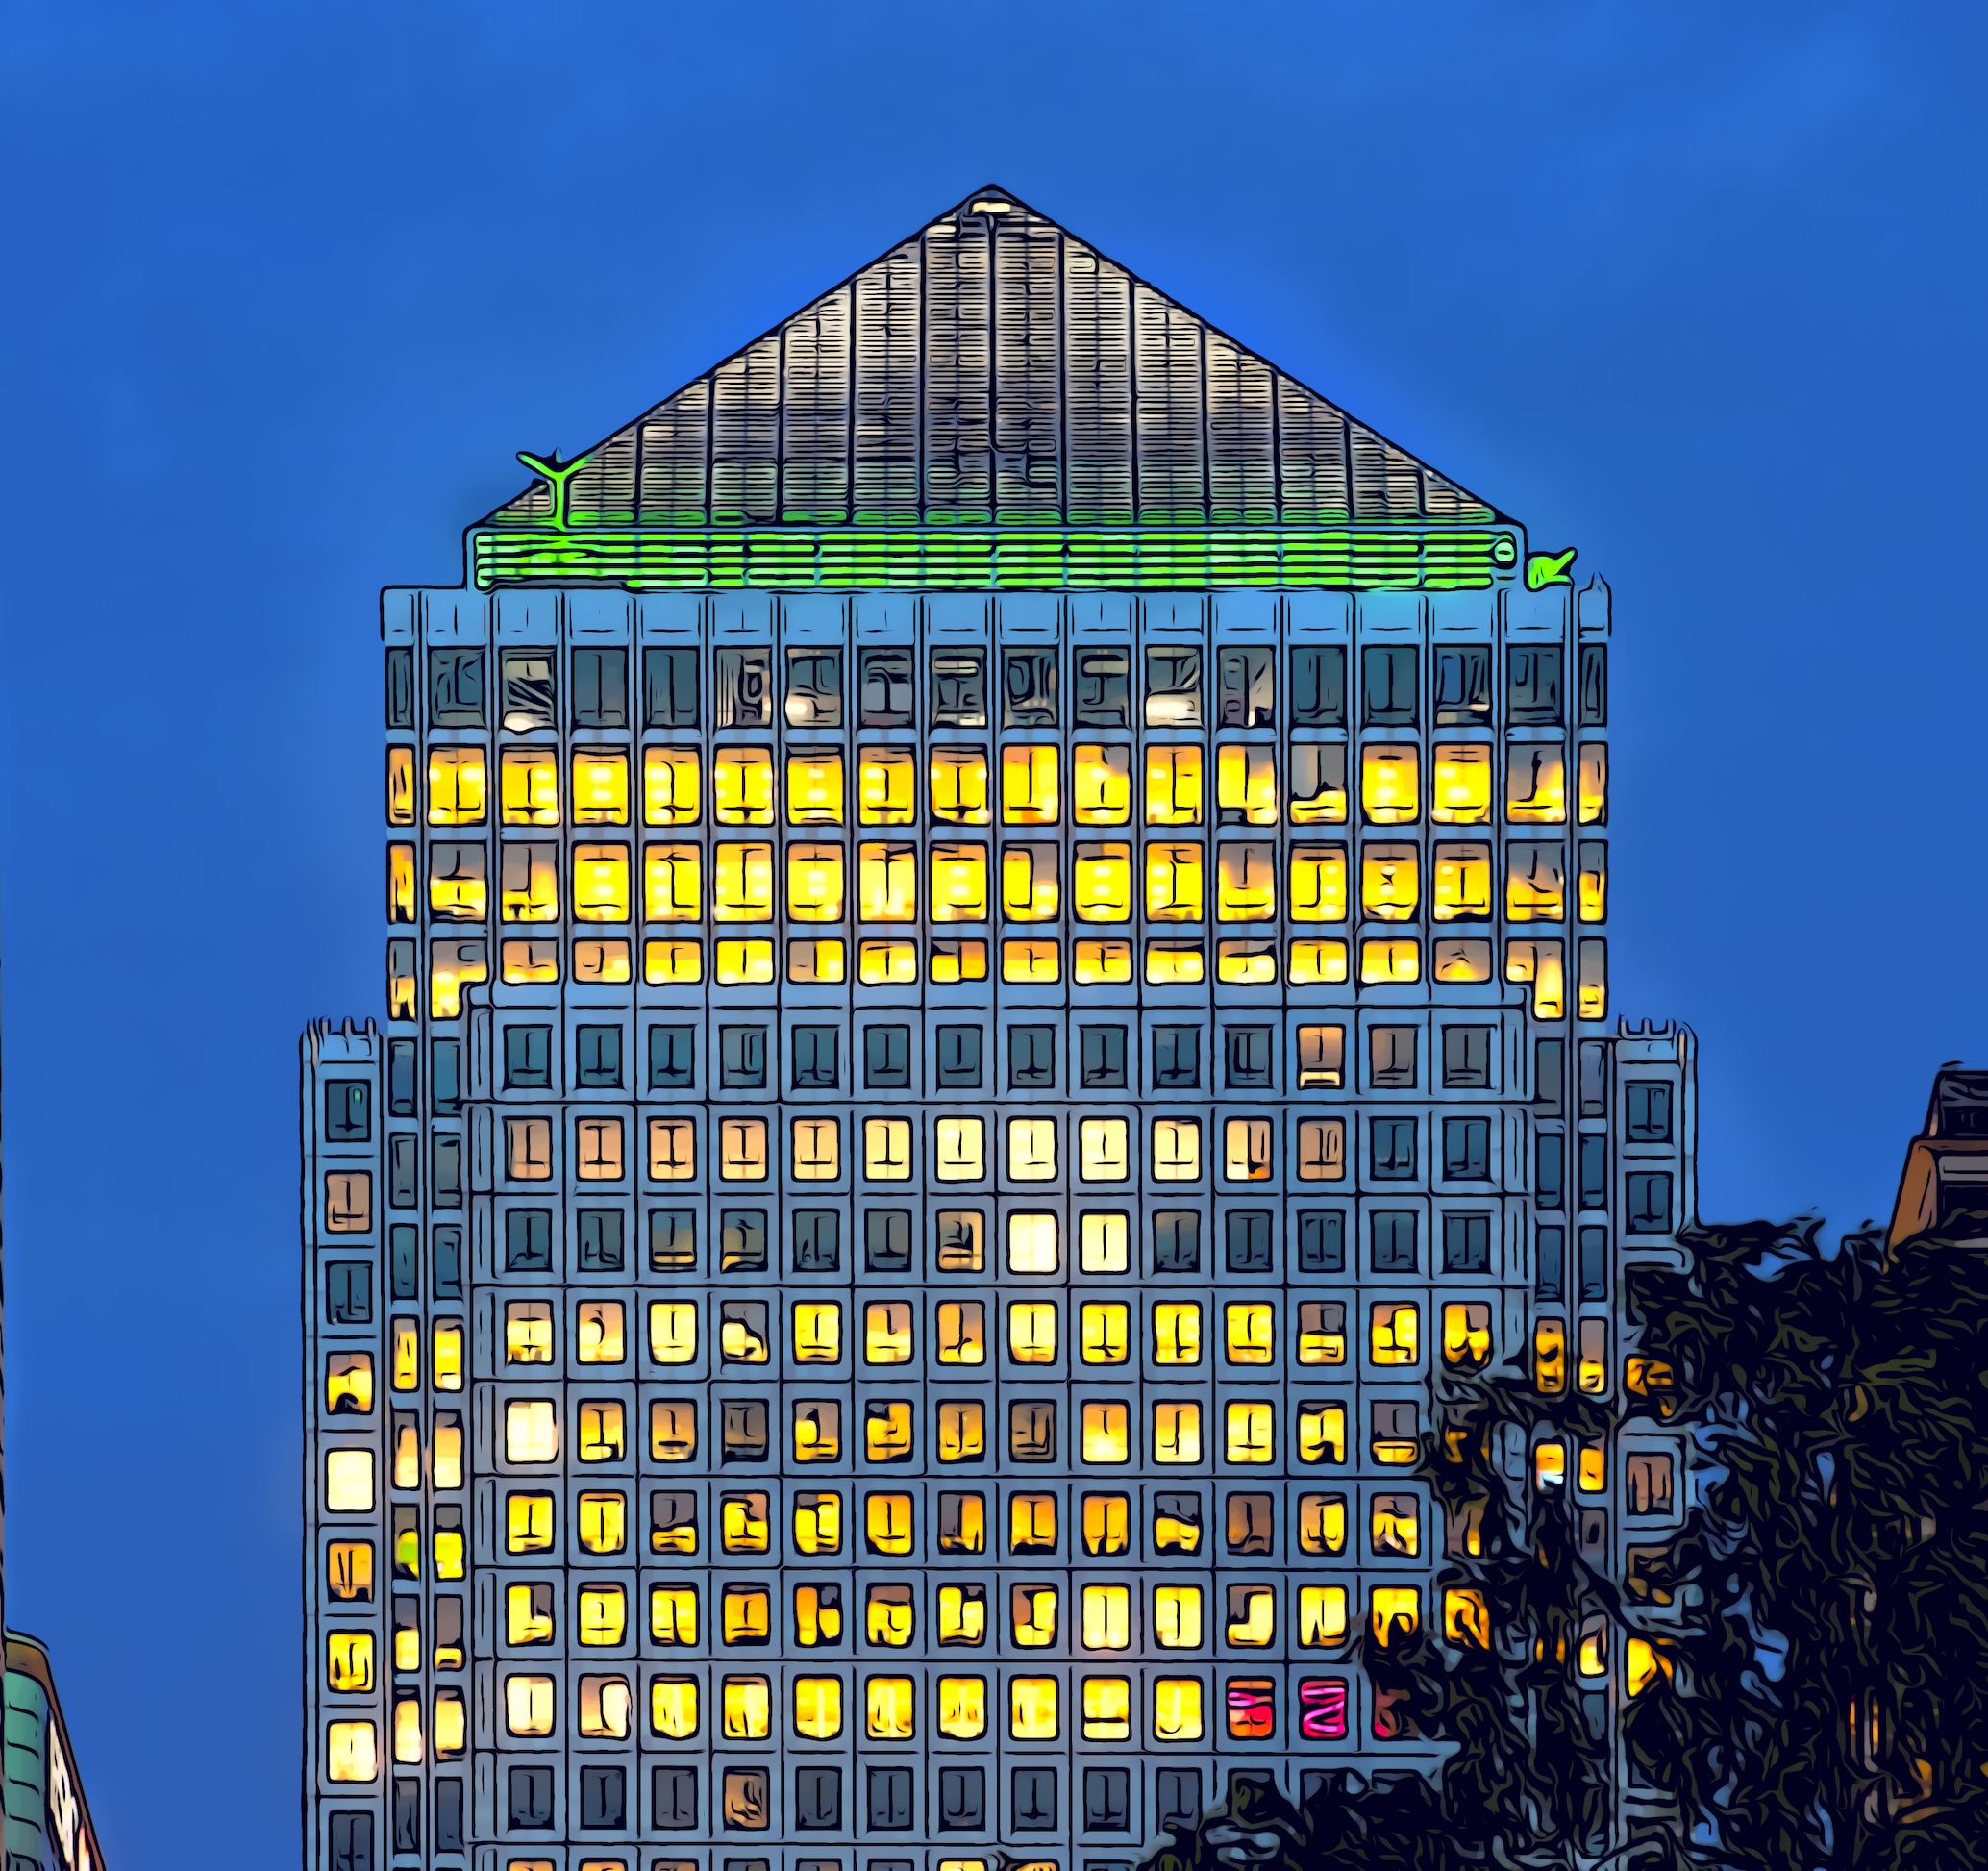 One Canada Square (Canary Wharf) with green lighting